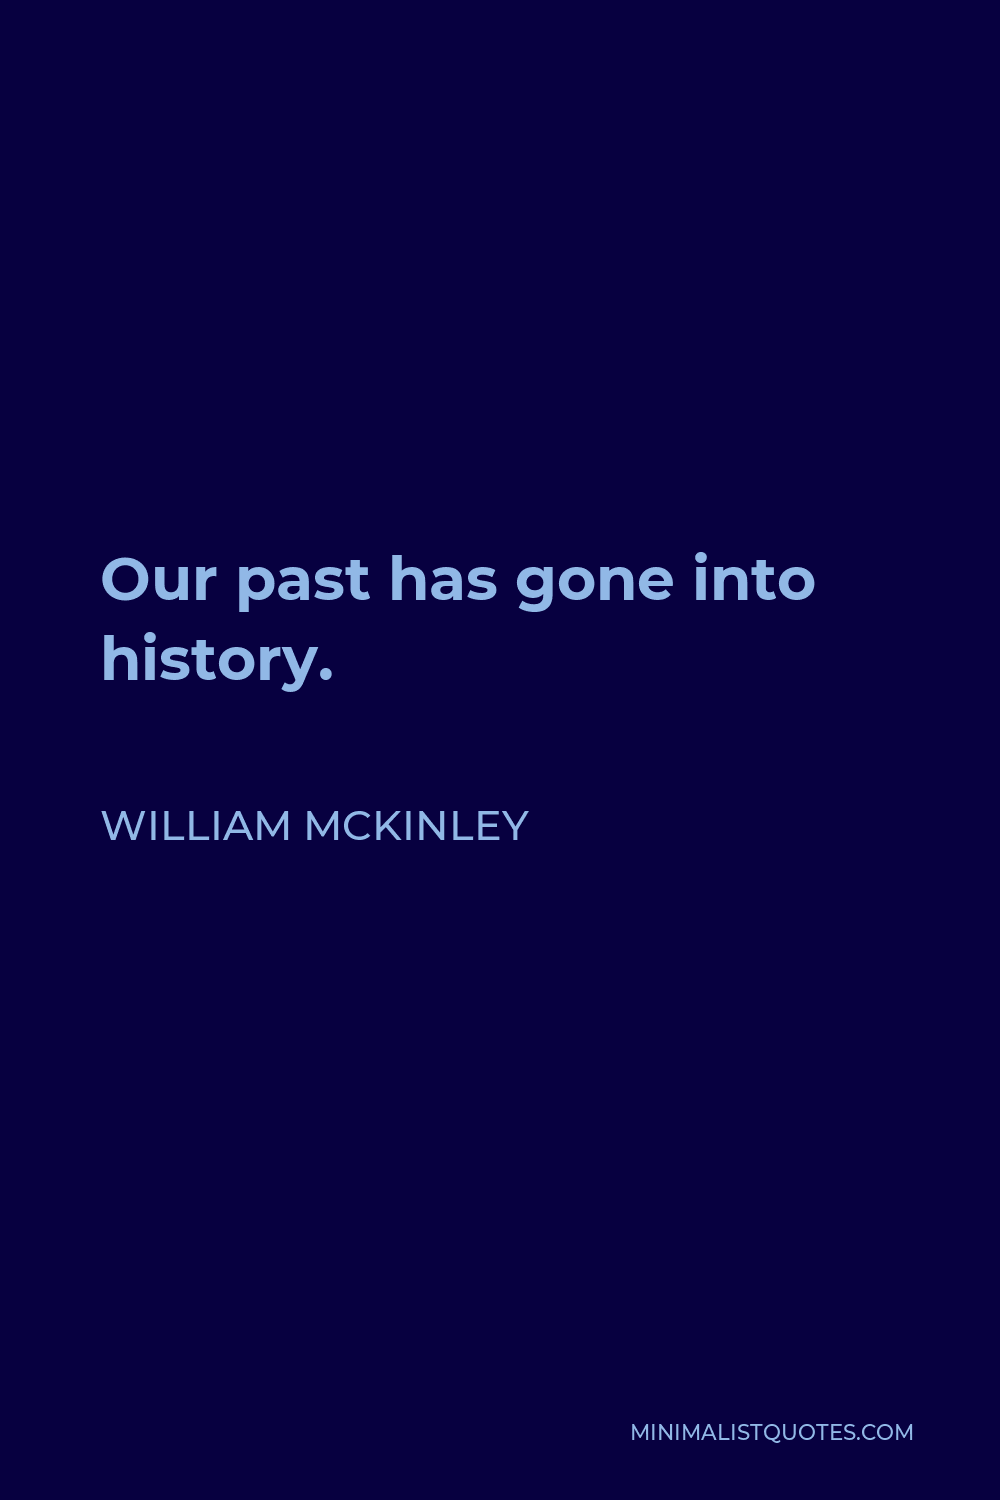 William McKinley Quote - Our past has gone into history.